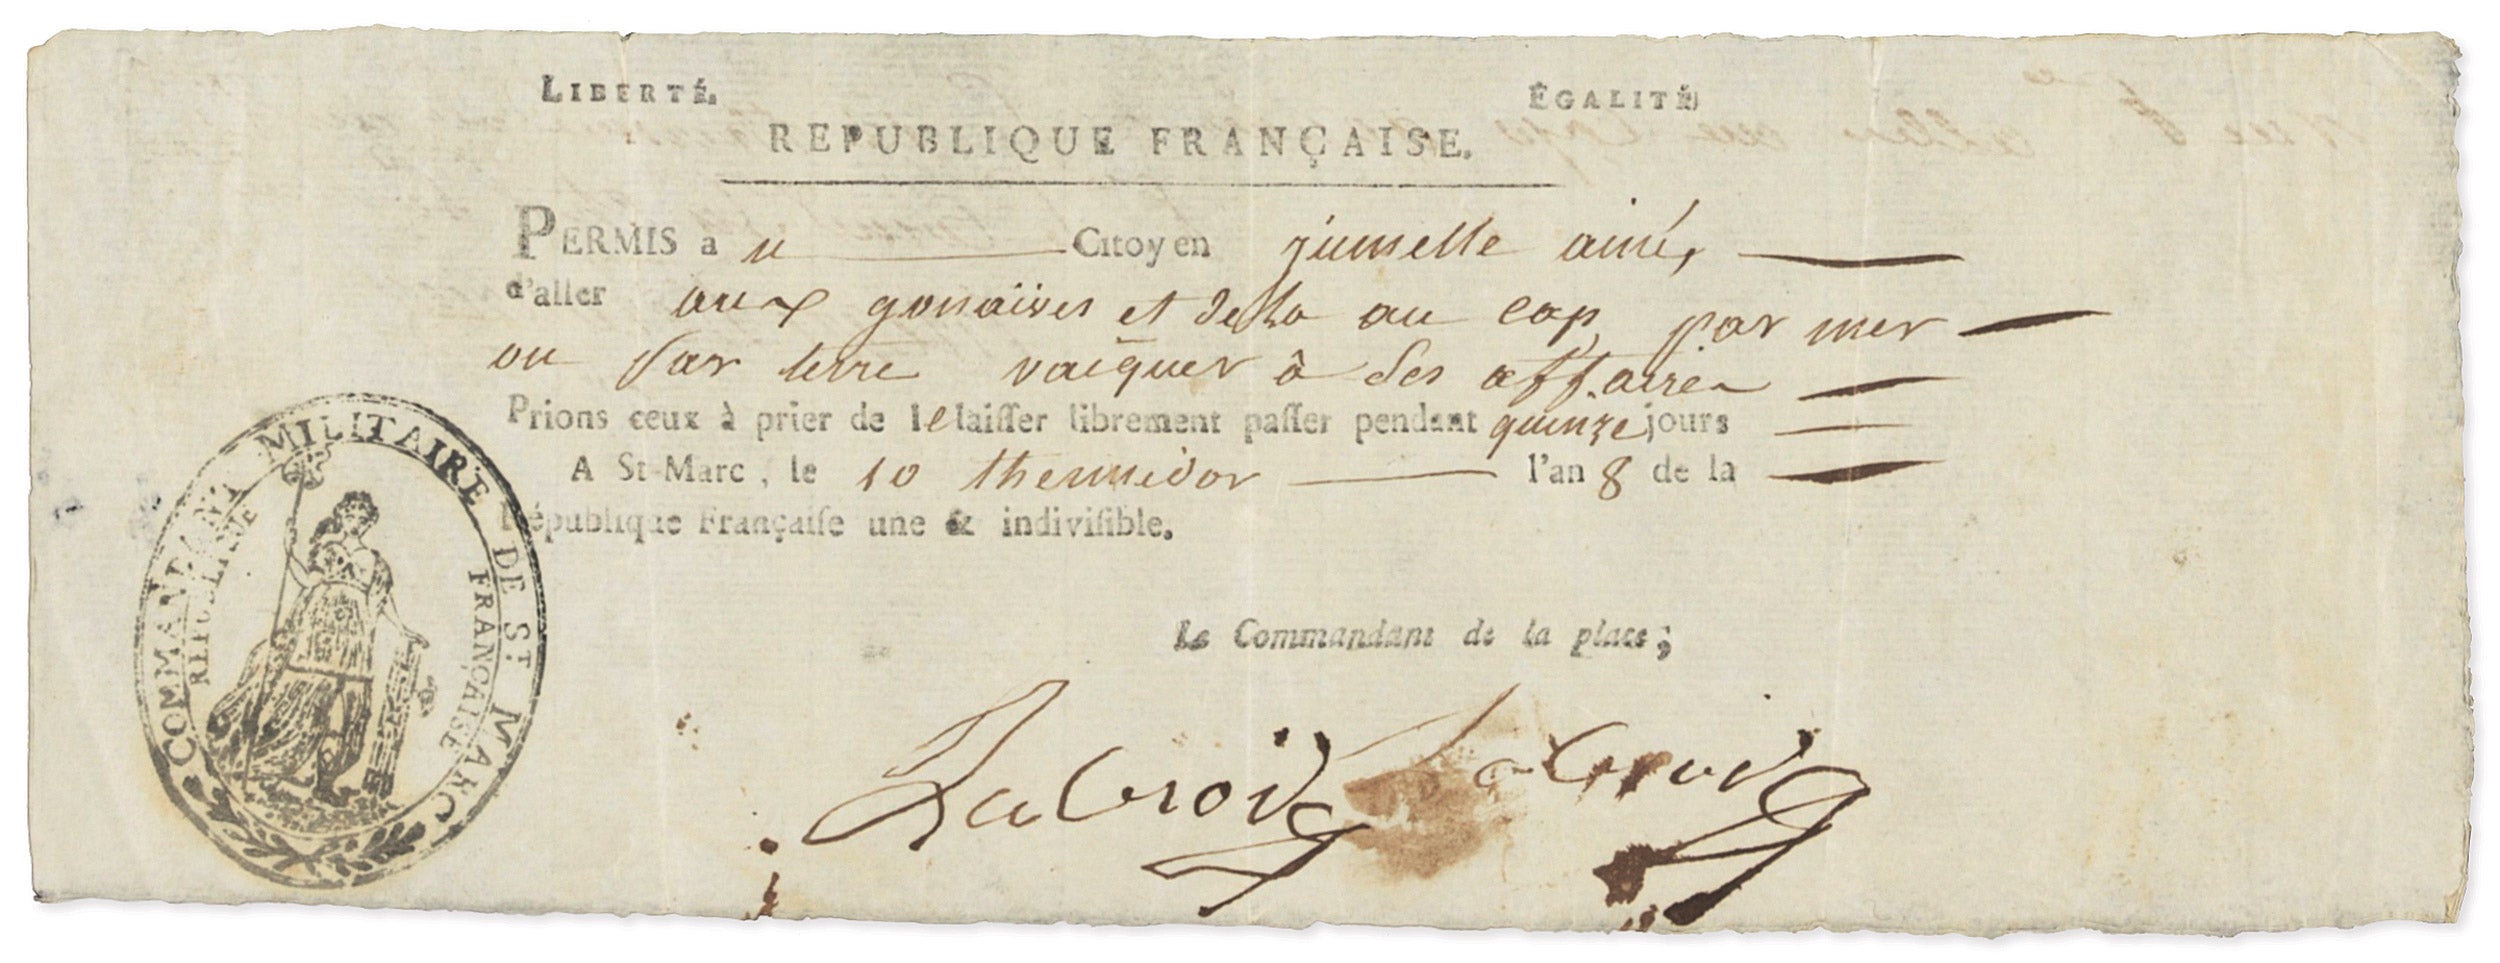 An 1800 permit to travel around the French colony of Saint-Domingue (now Haiti).